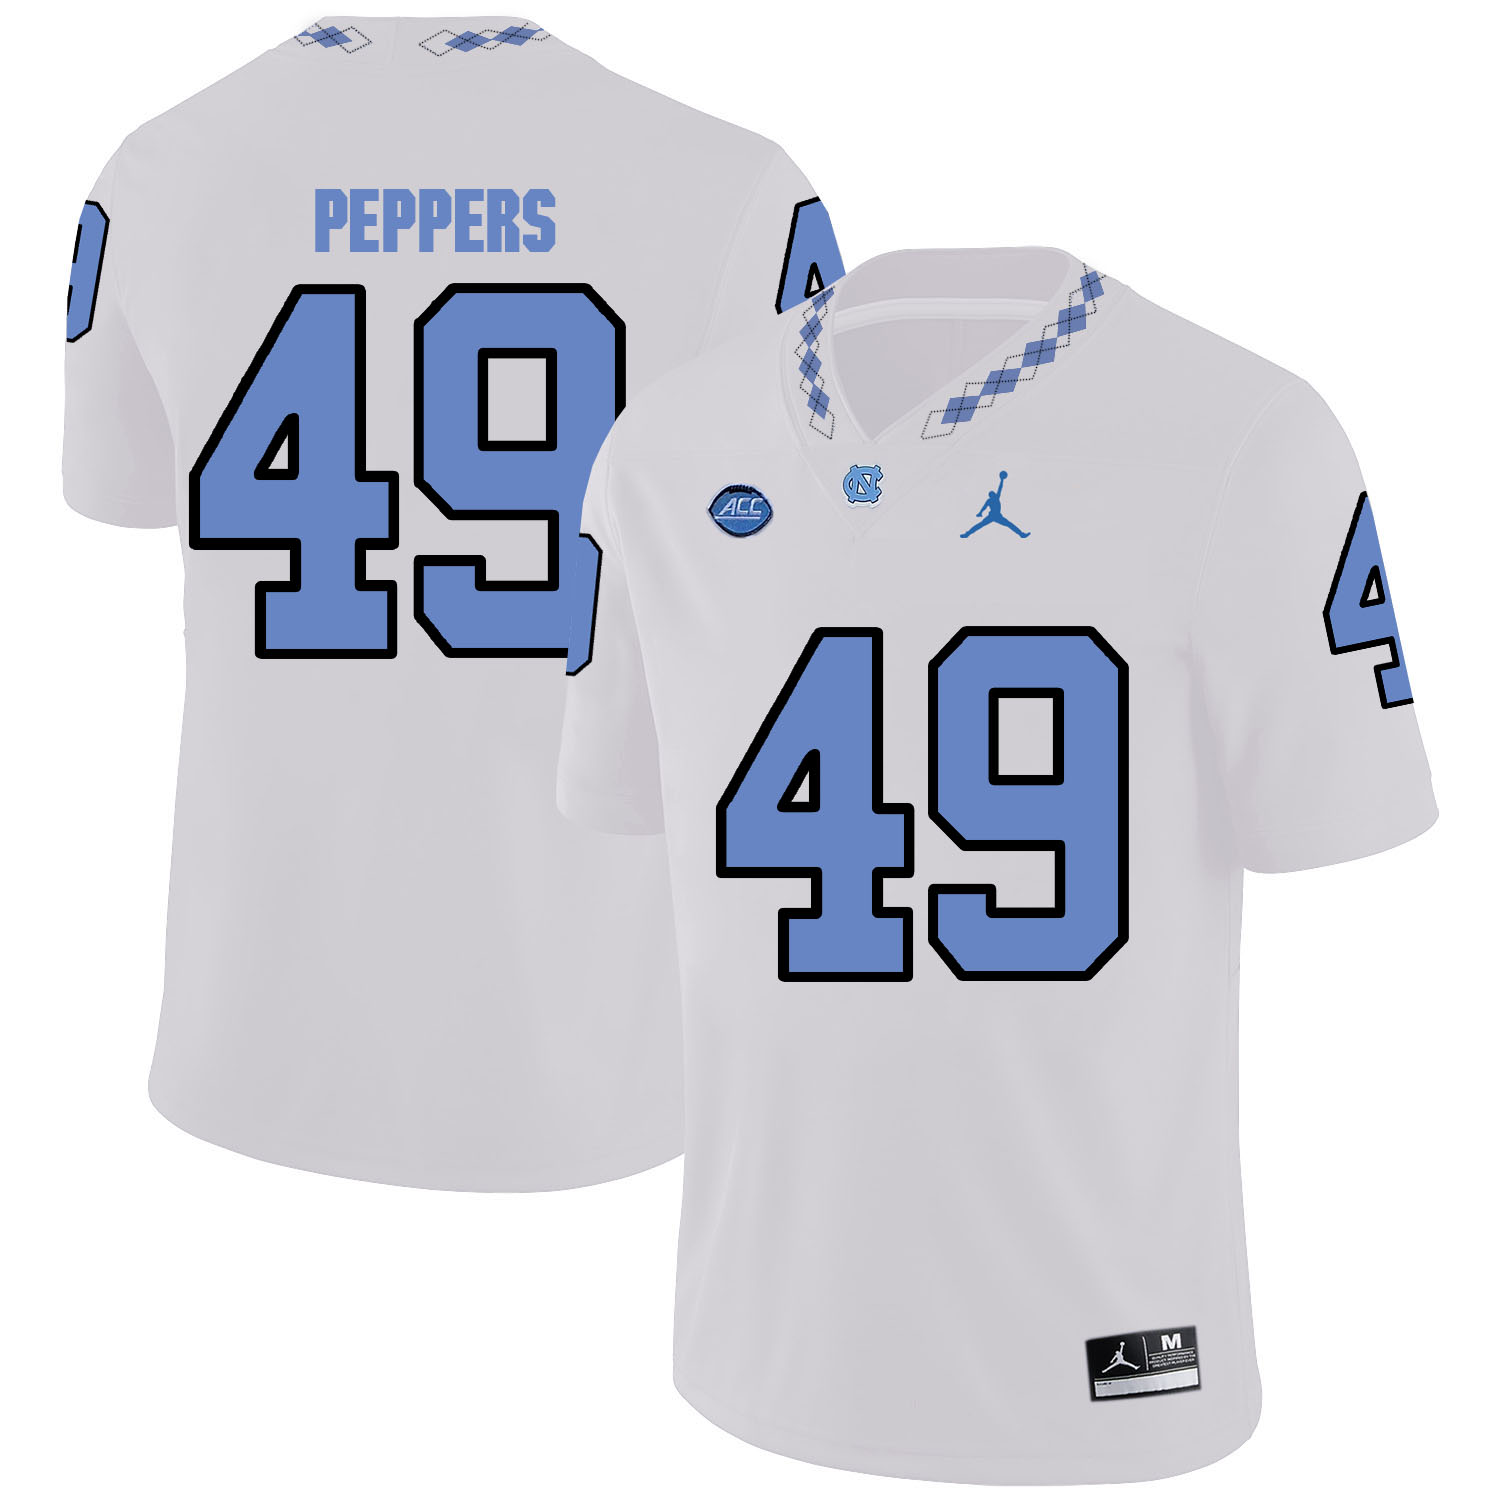 North Carolina Tar Heels 49 White Peppers Blue College Football Jersey